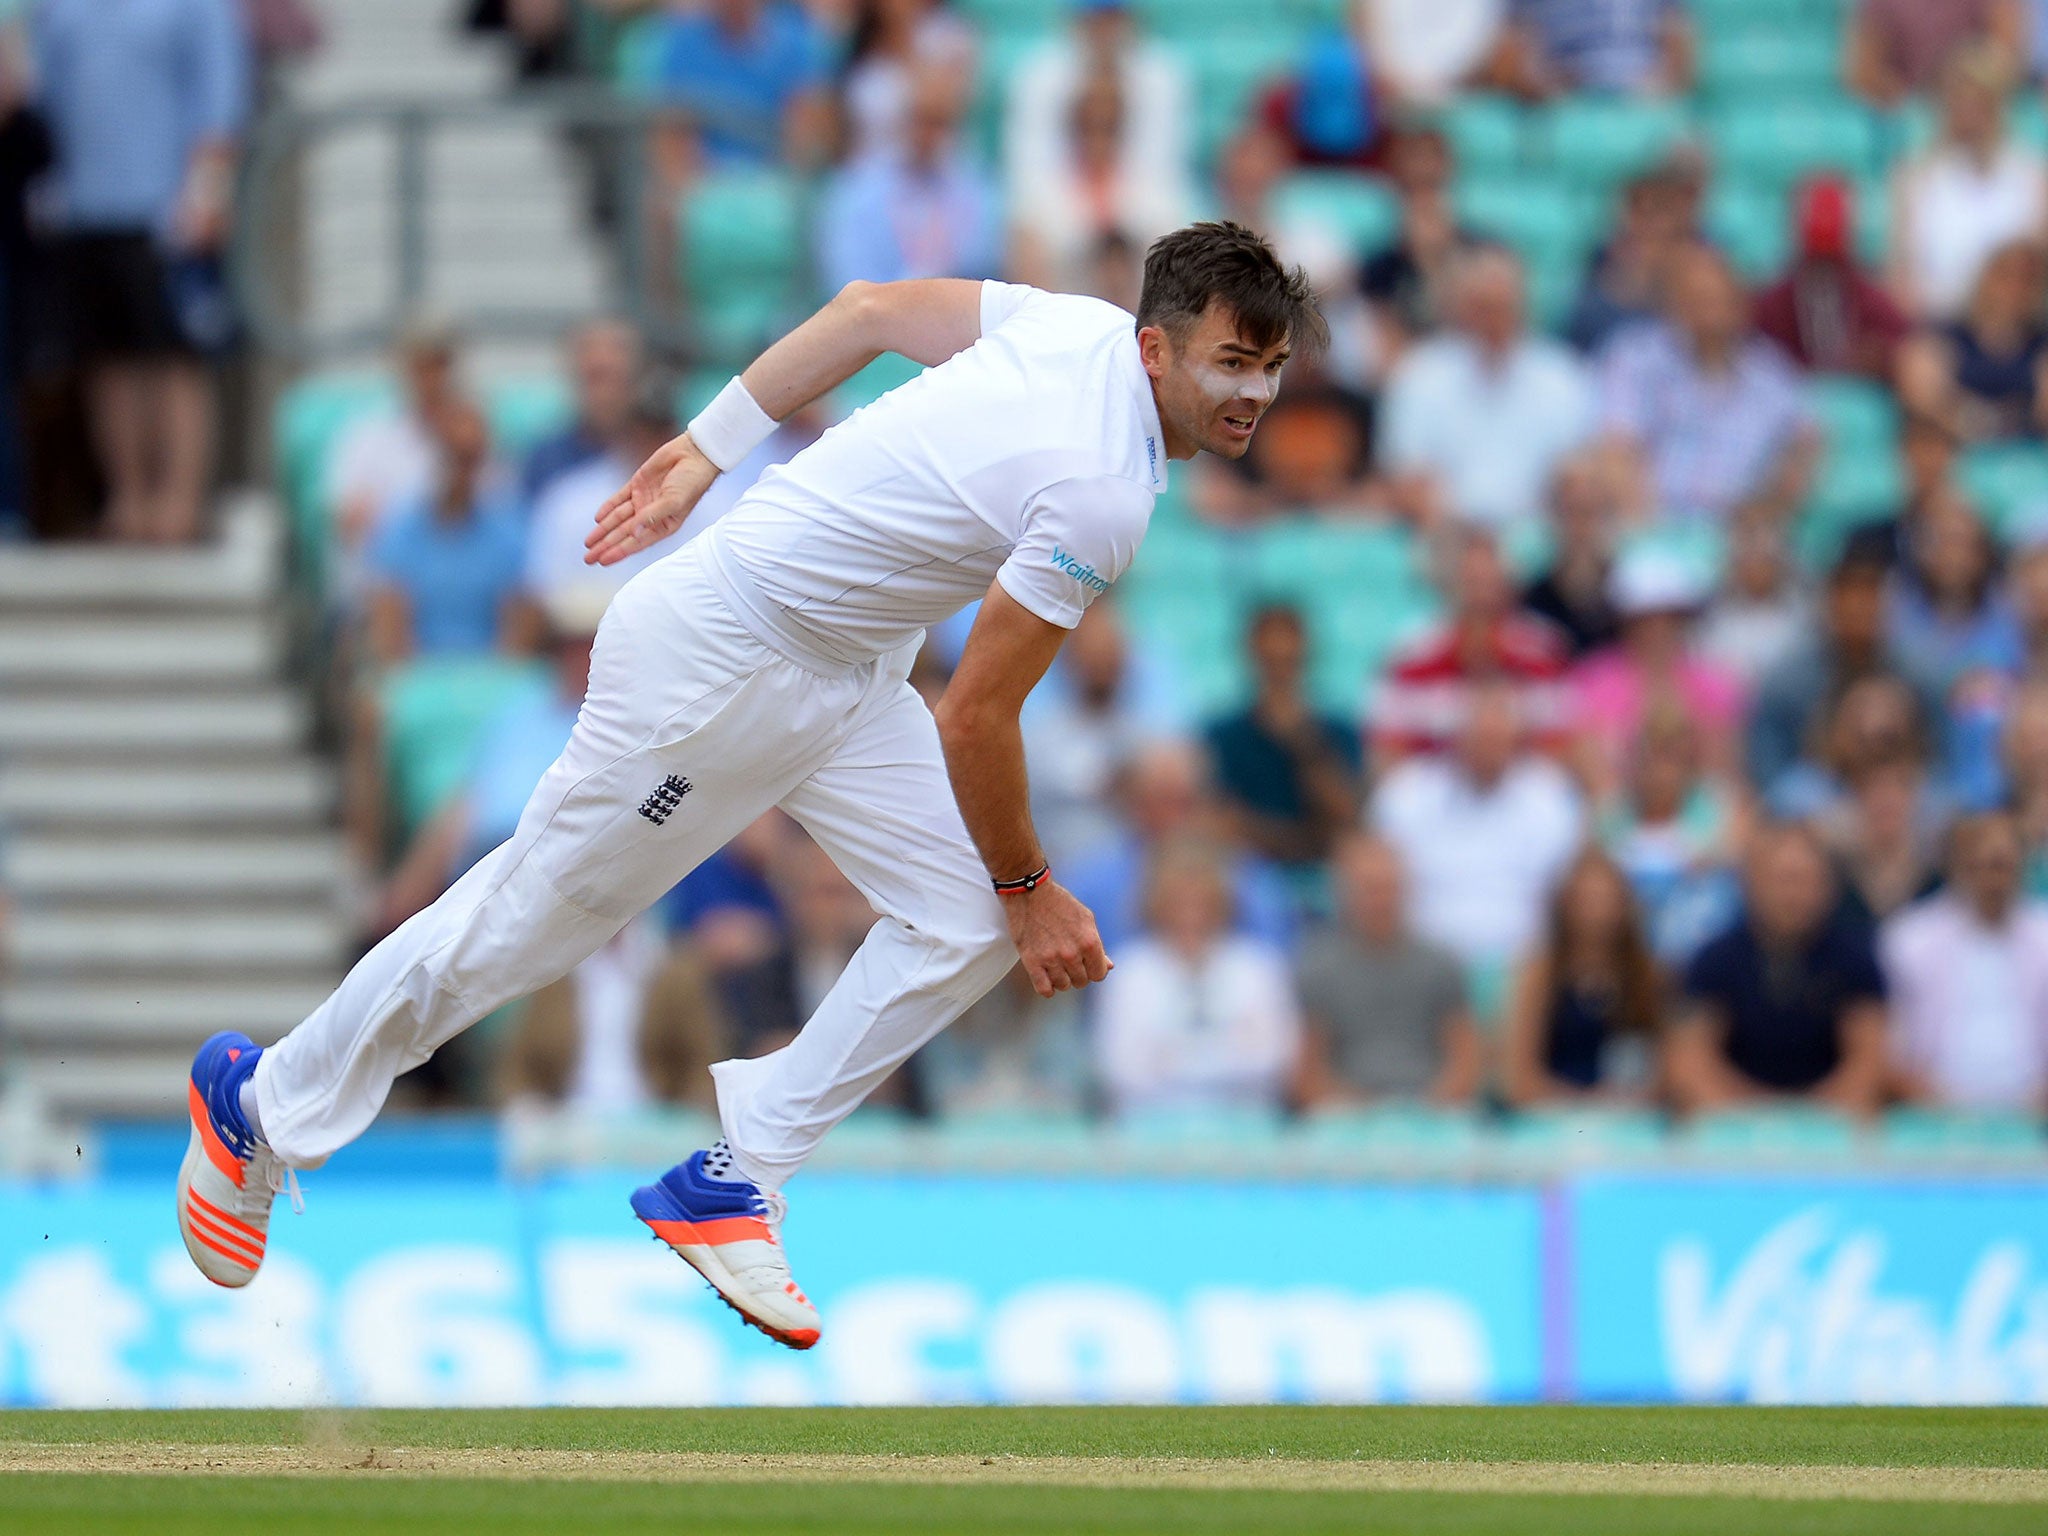 James Anderson has been ruled out of the fifth Test between England and India